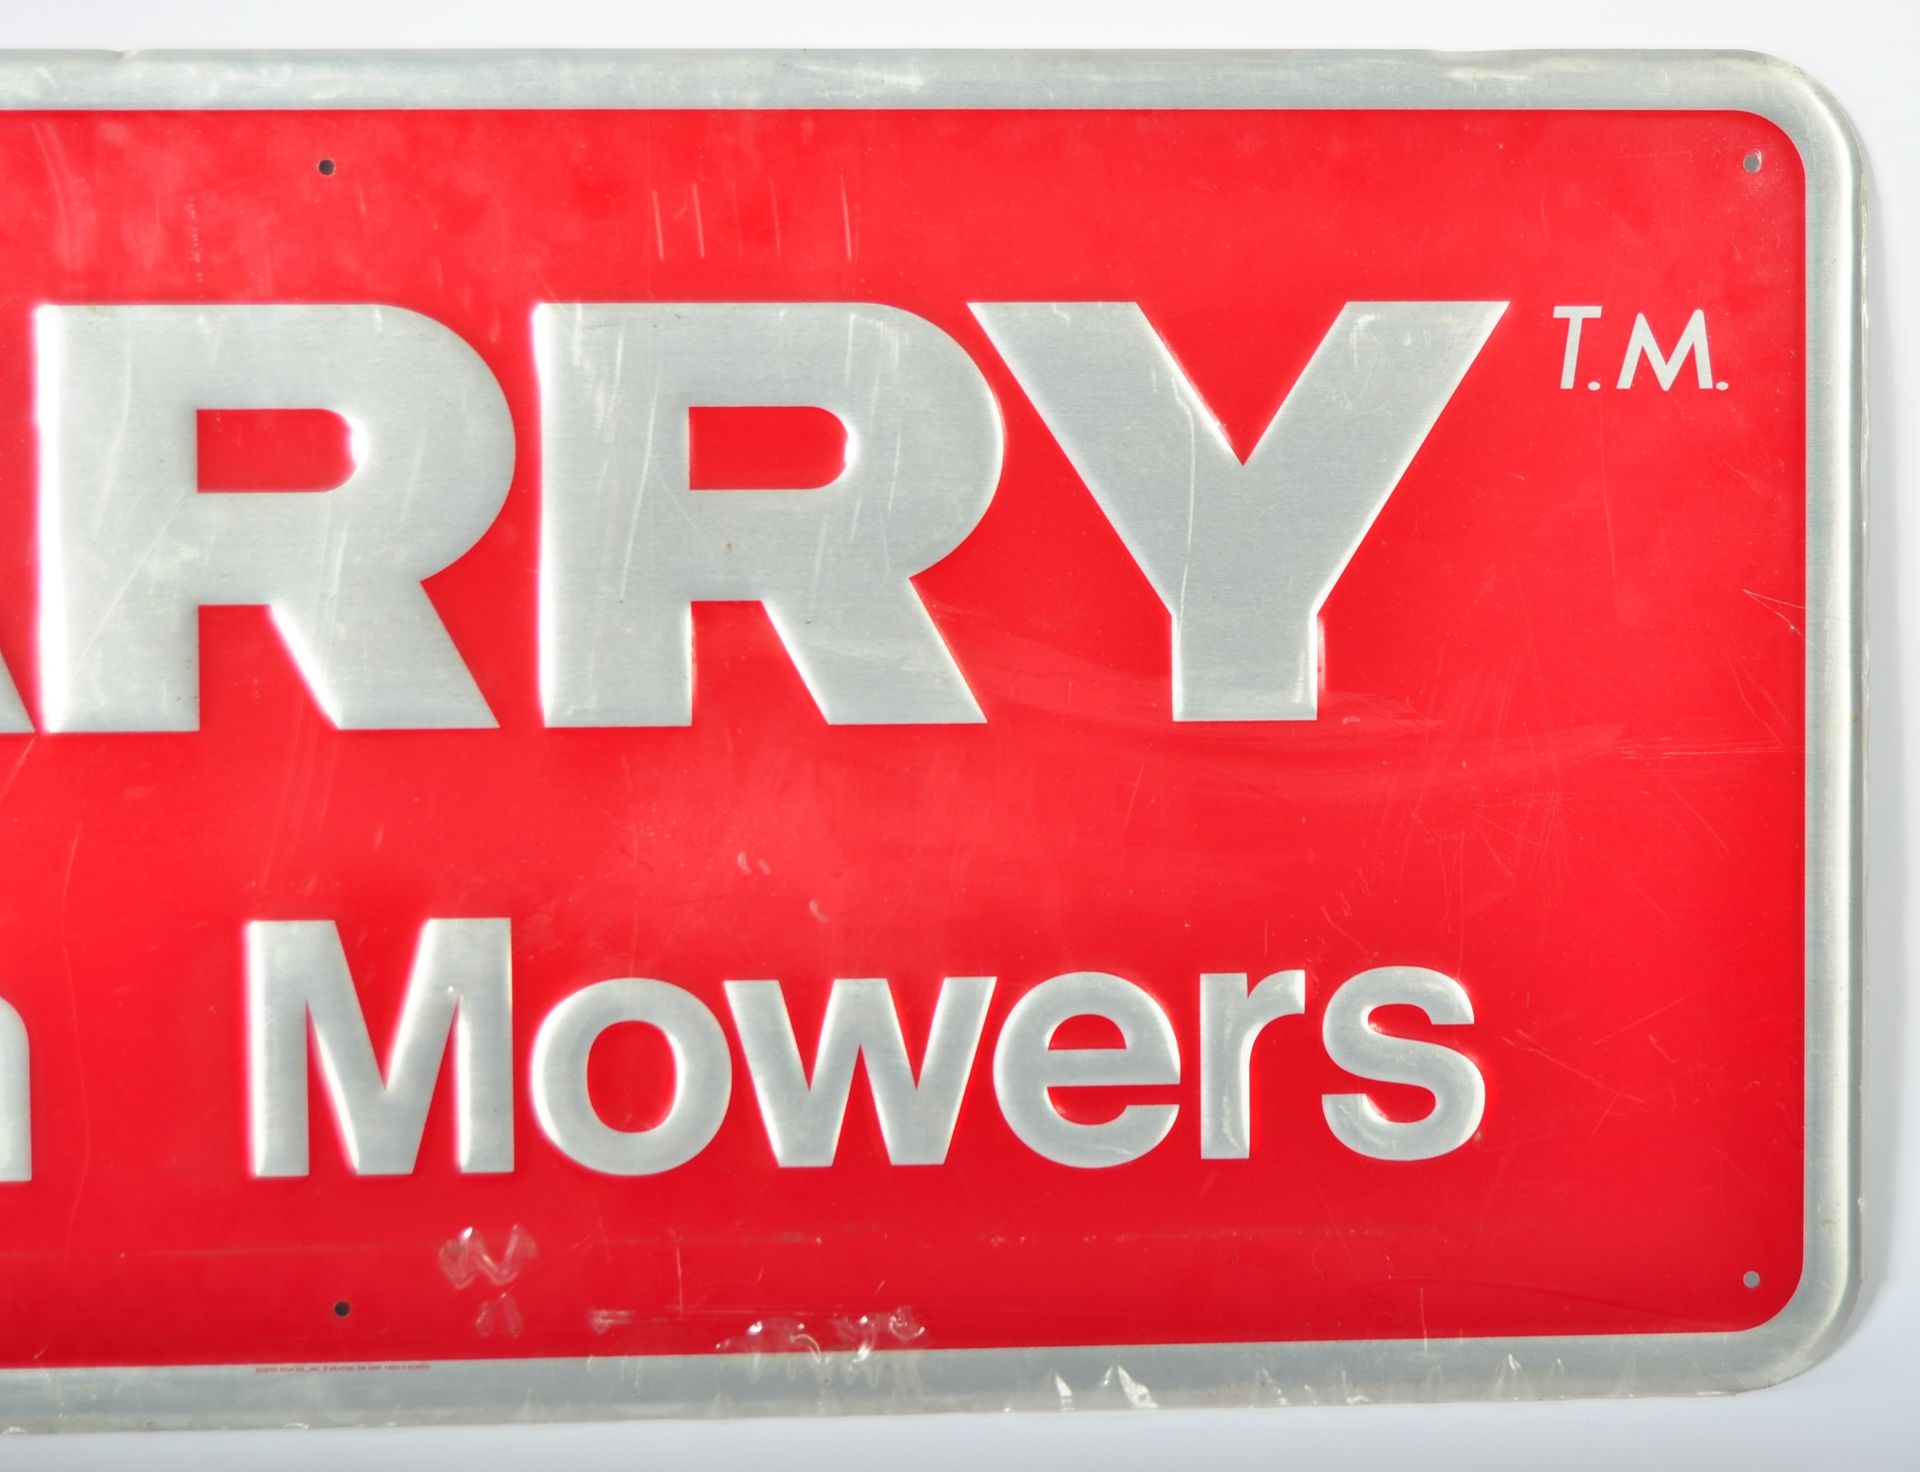 HARRY LAWN MOWERS 1980'S POINT OF SALE ADVERTISING SIGN - Bild 3 aus 4